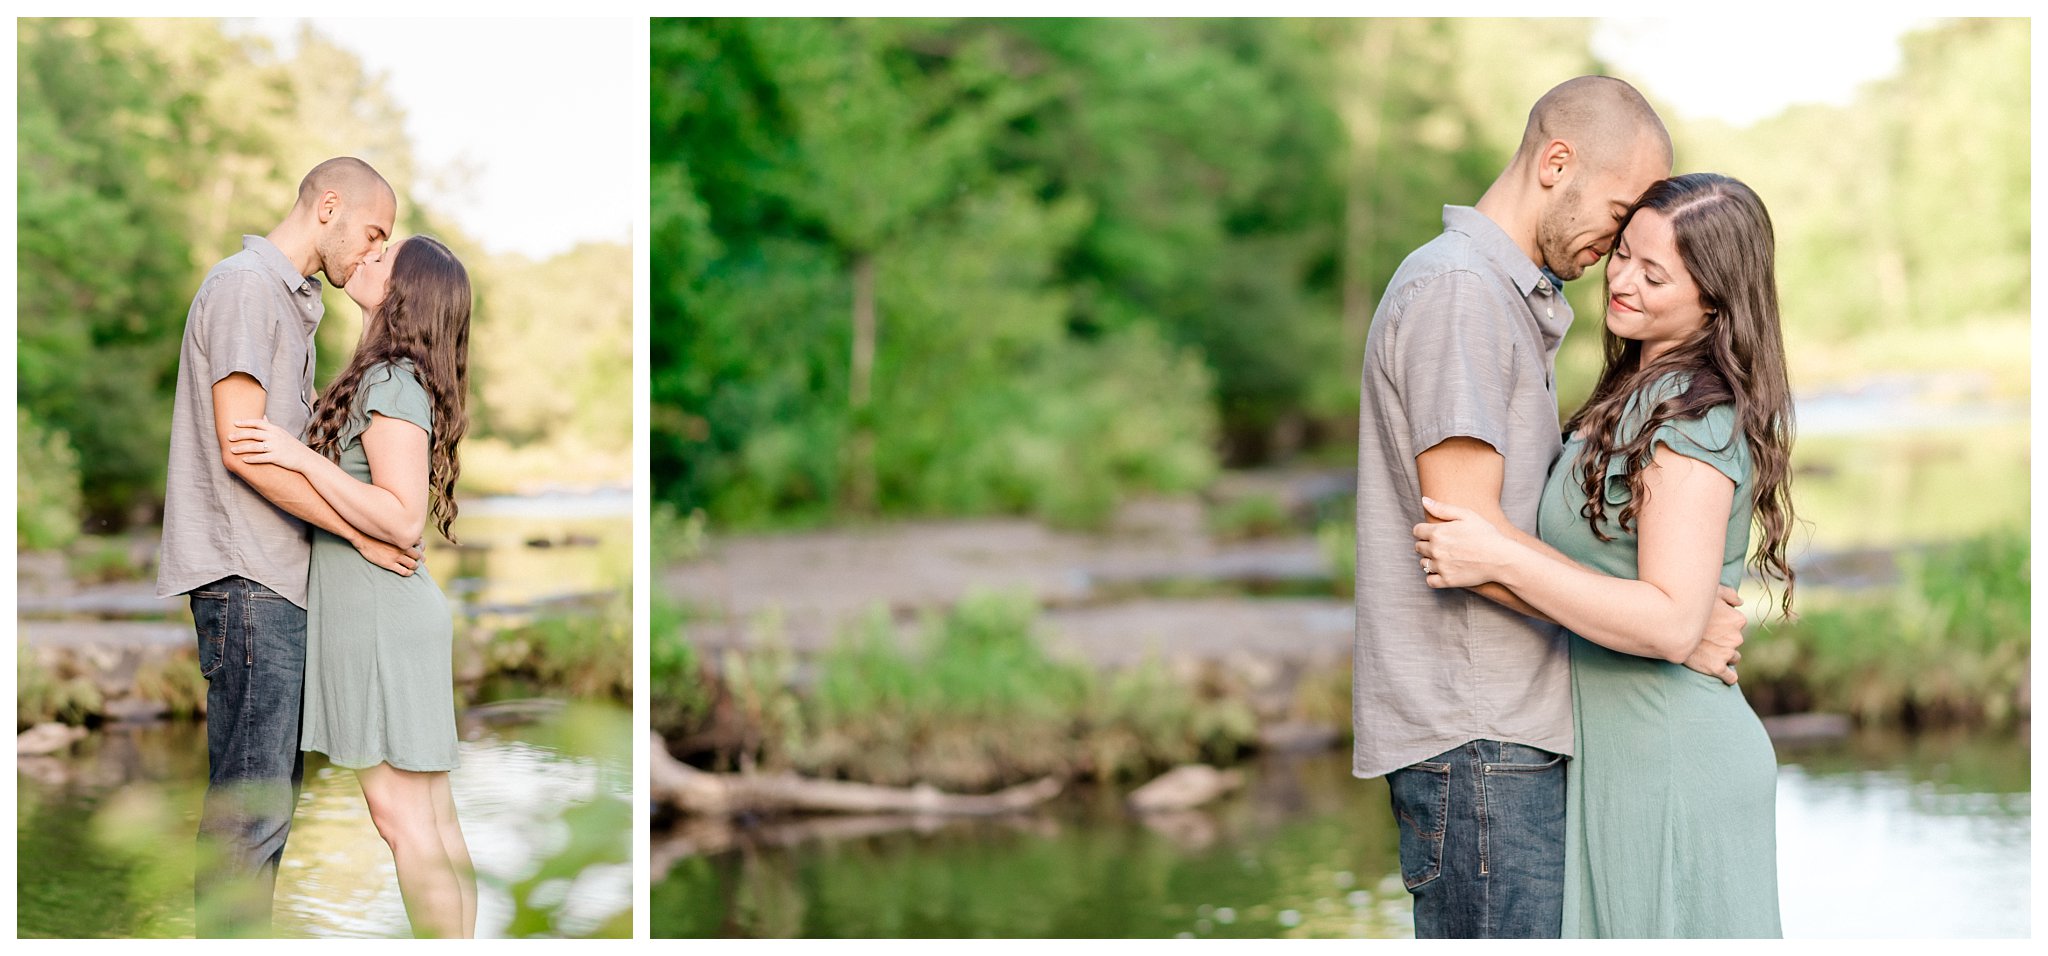 Salmon River Falls Engagement Session Joanna Young Photography_0025.jpg